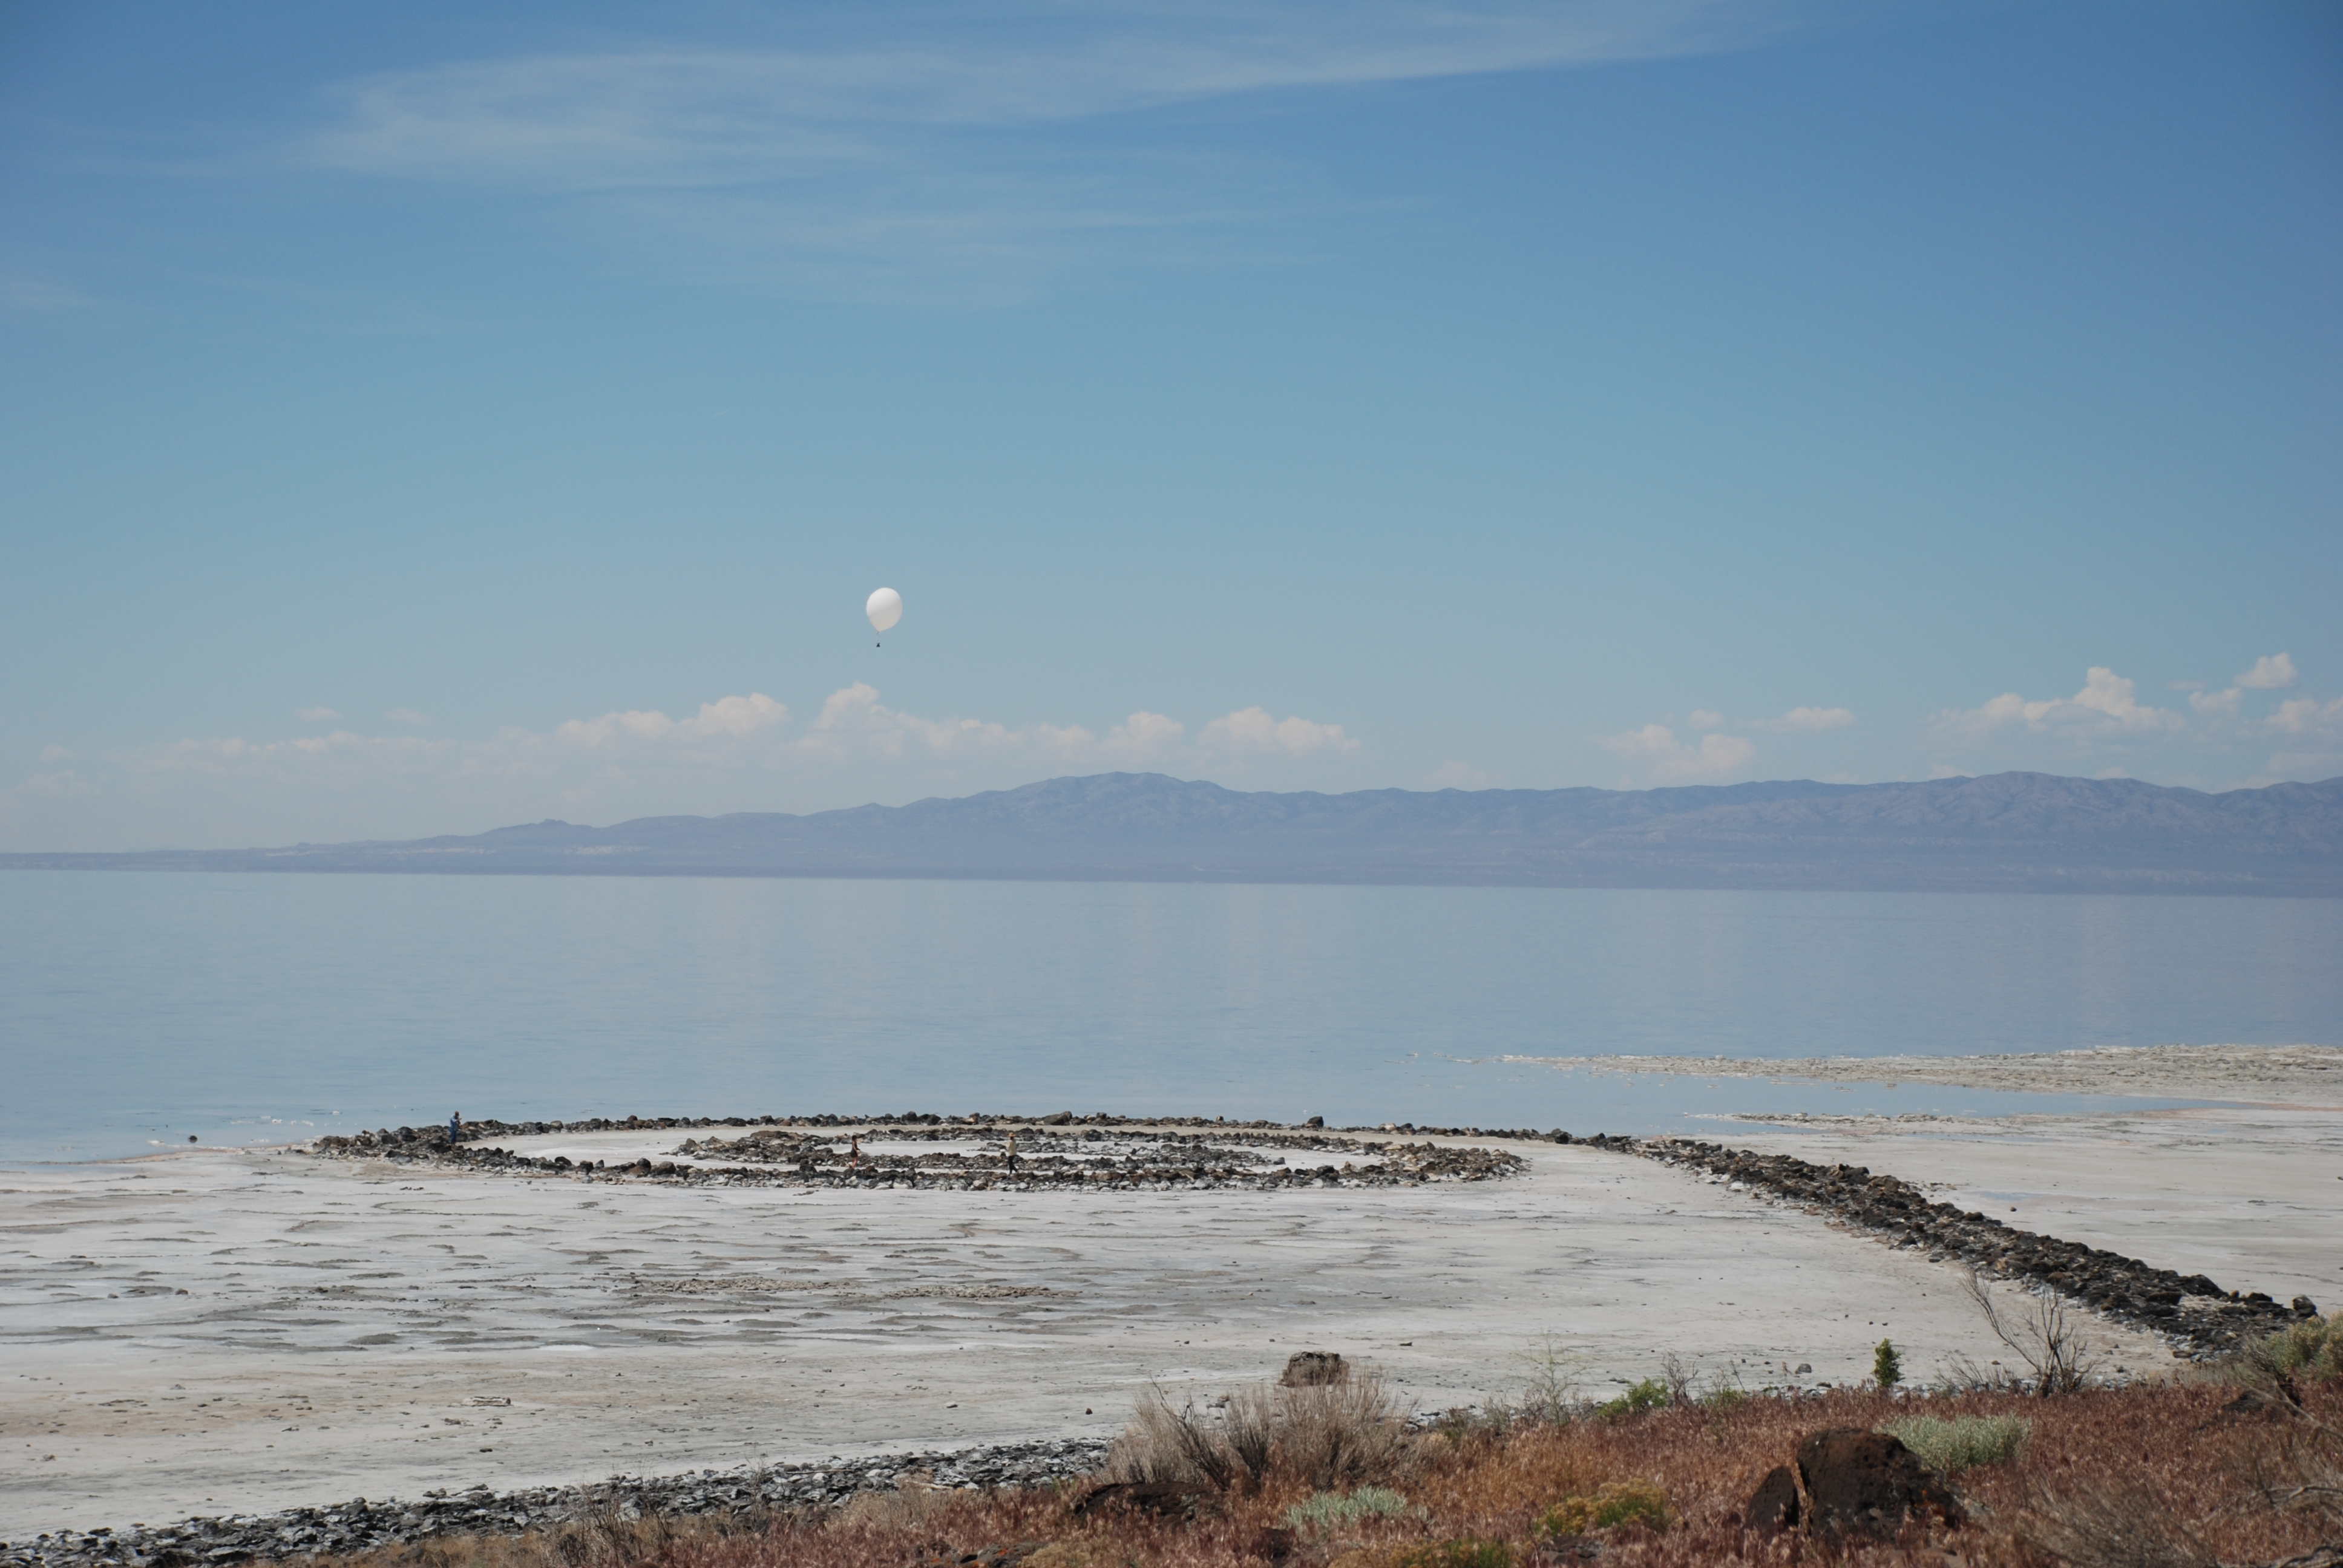 image-2-view-of-spiral-jetty-with-tethered-balloon-and-camera-photo-by-katie-stone-sonnenborn1